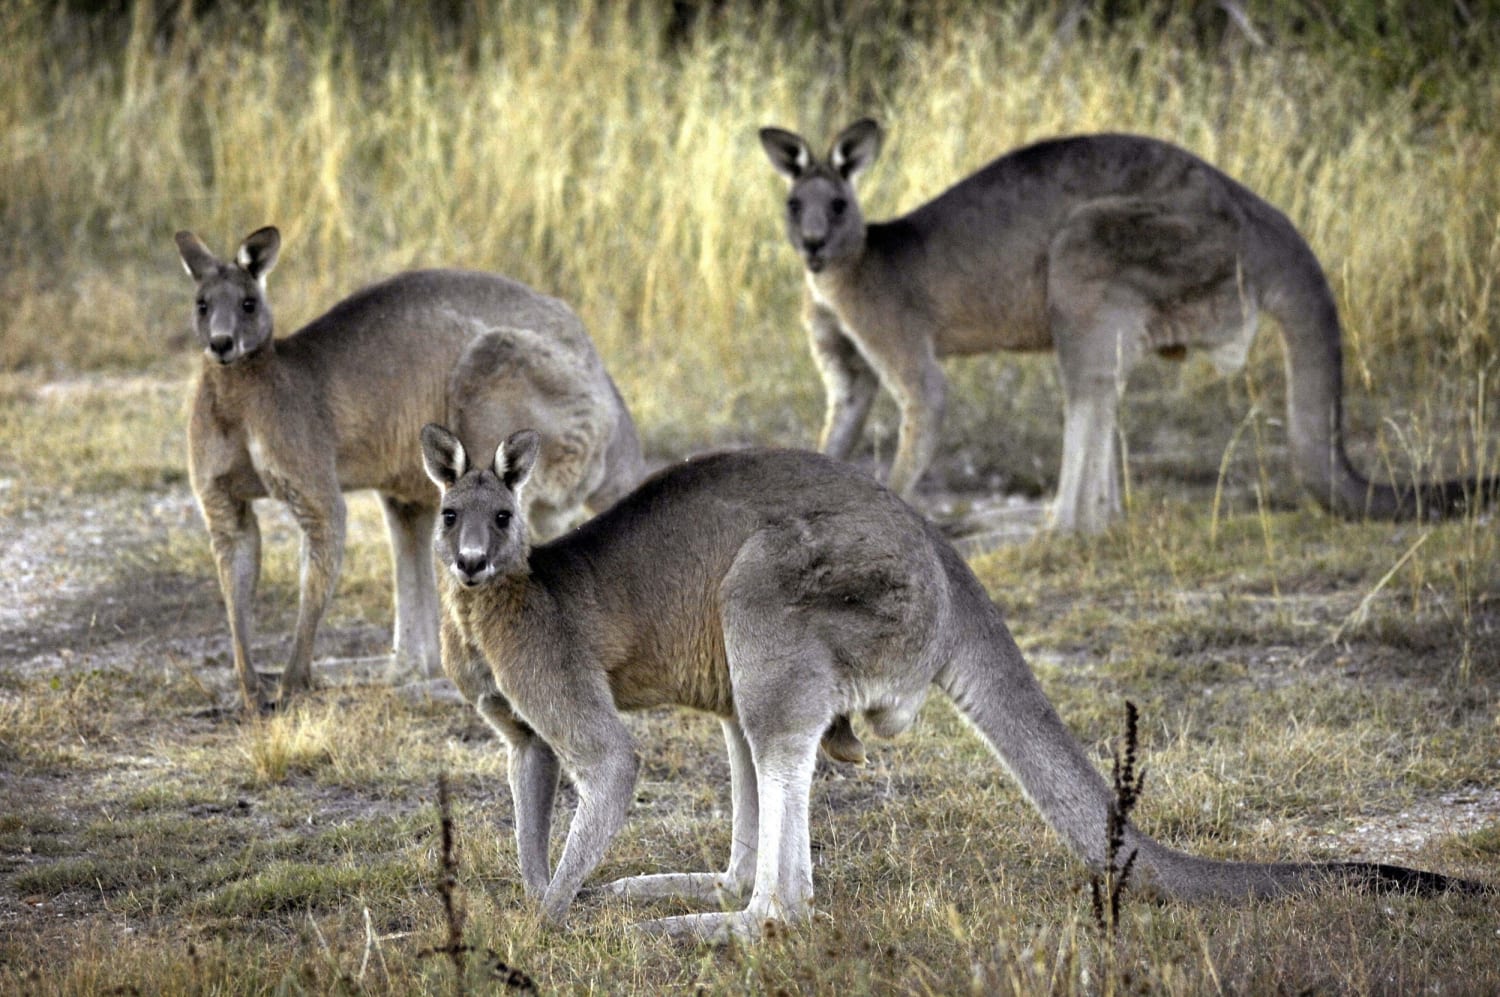 Australian man killed by wild kangaroo he was believed to have kept as pet, police say